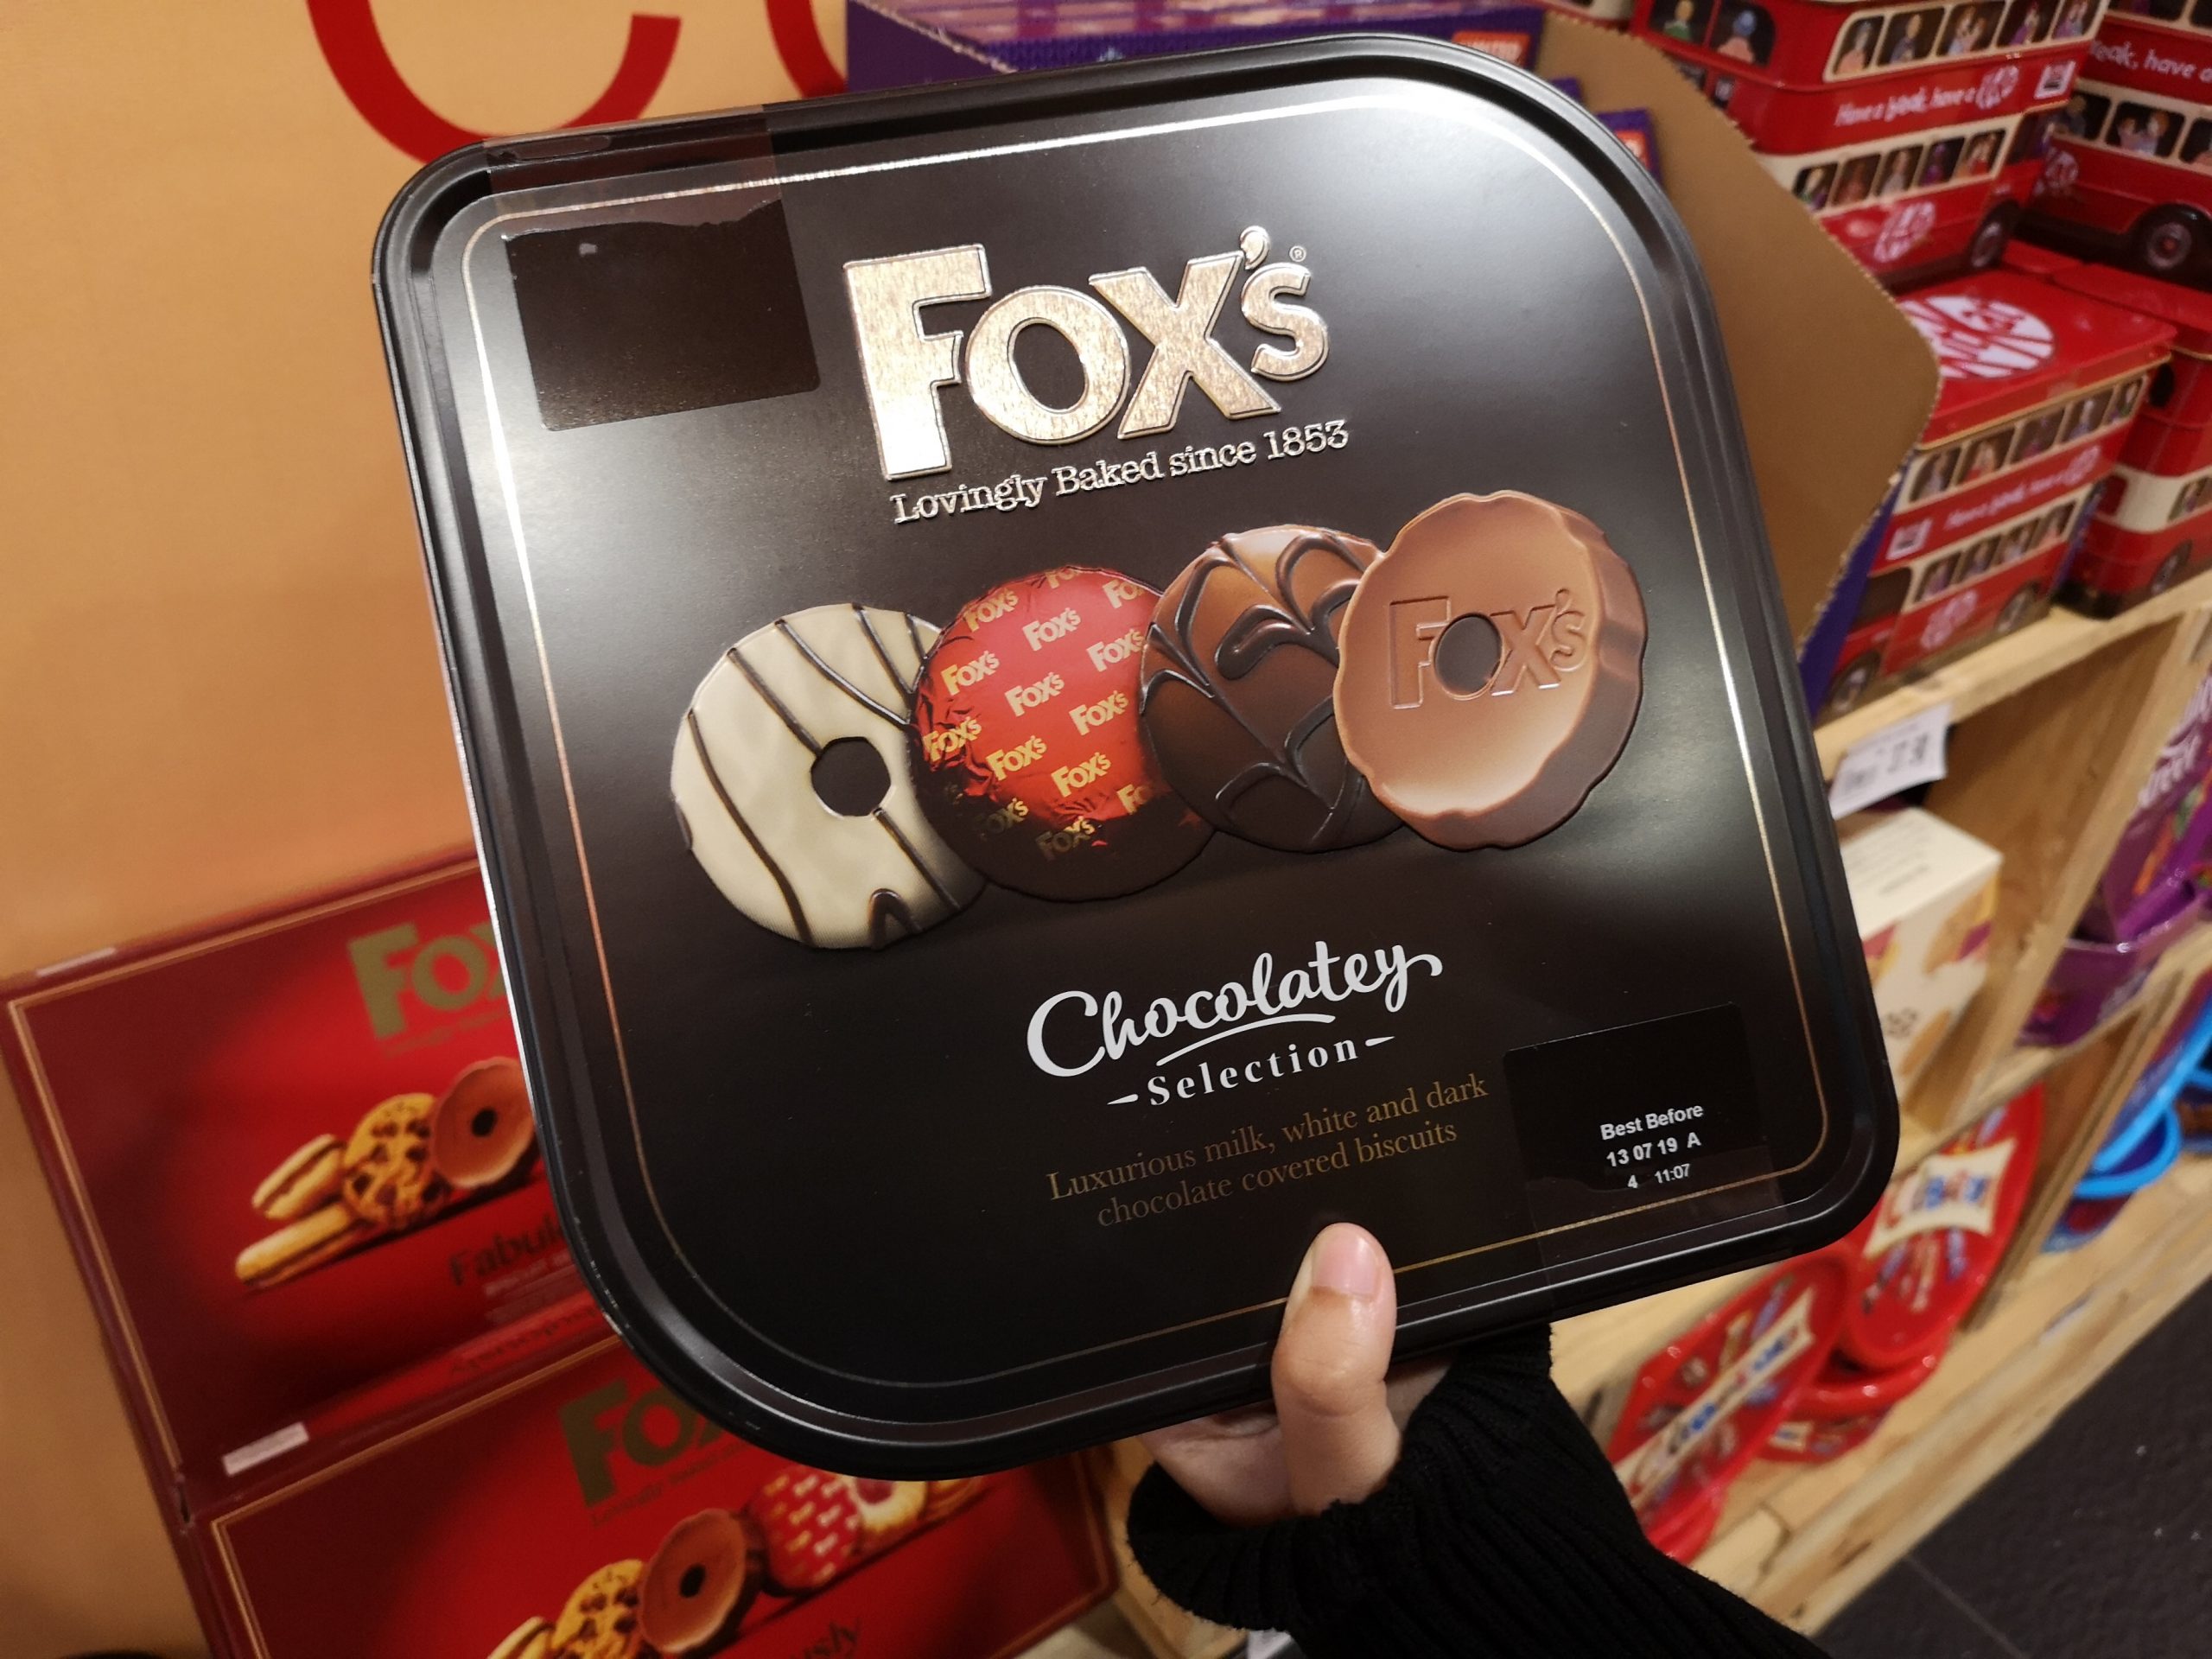 Contains Cookies – Ferrero to take over Fox’s Biscuits